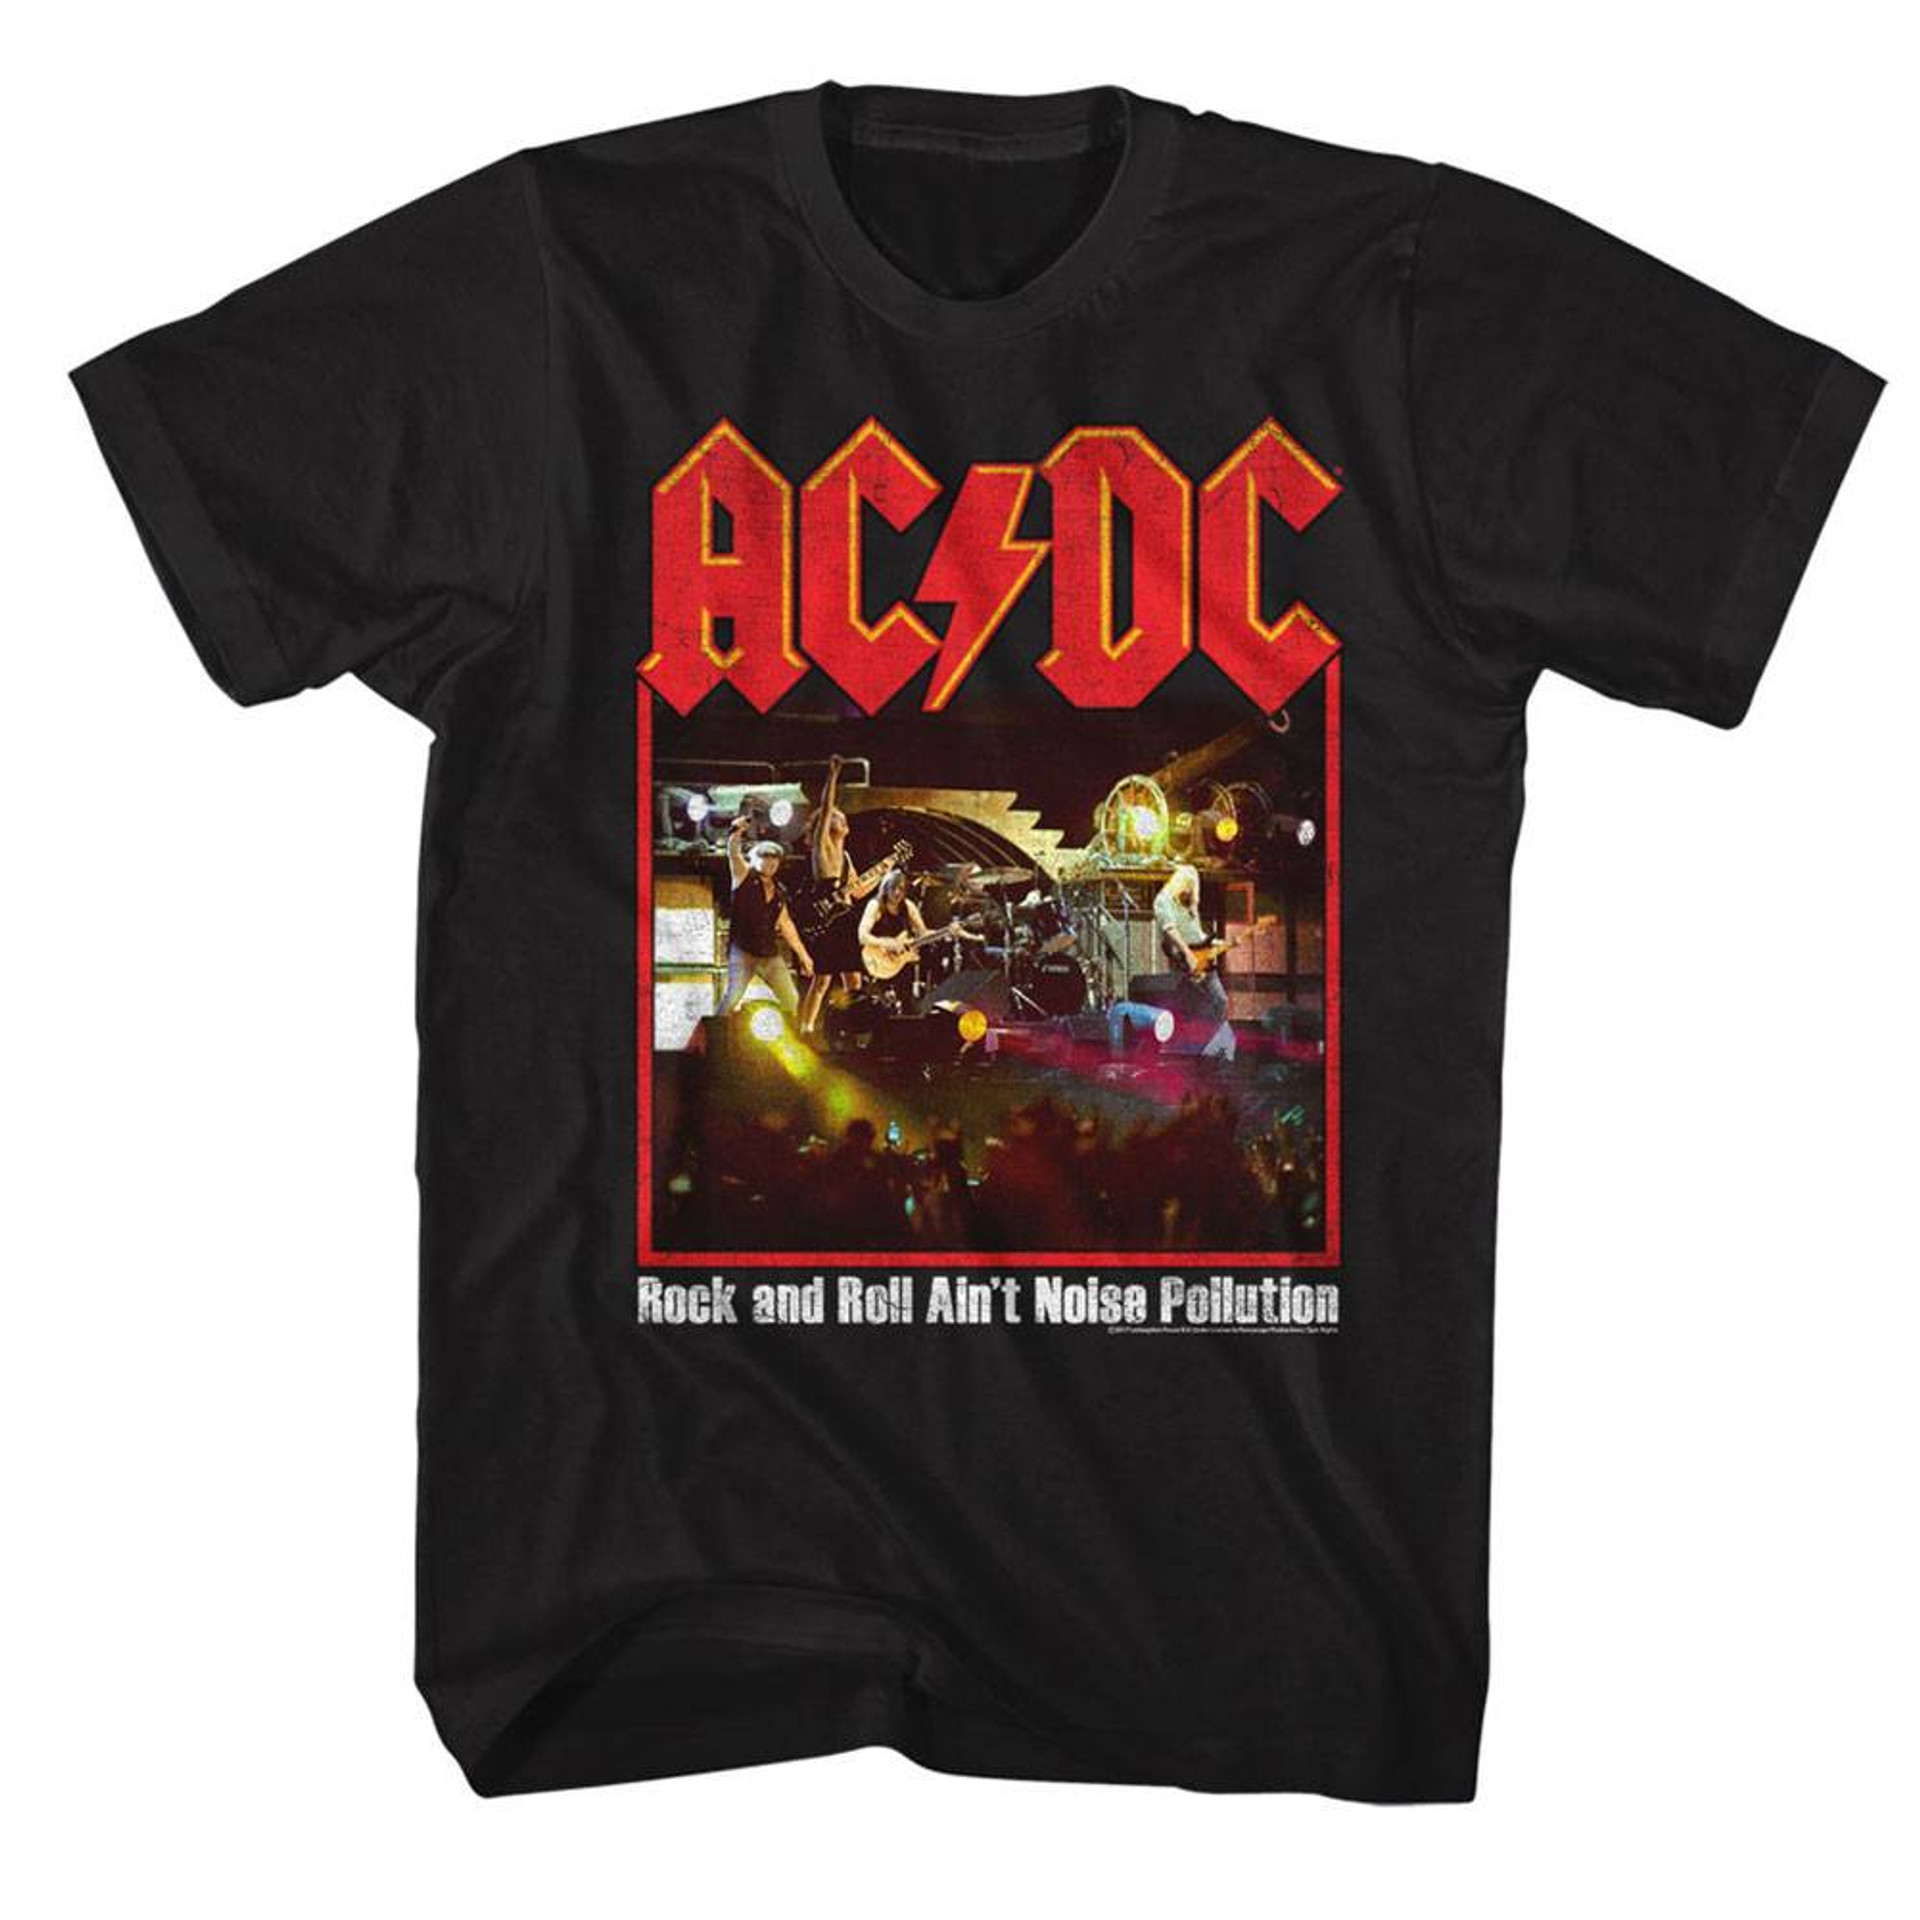 acdc noise pollution black adult t shirt 9089 kaqwc